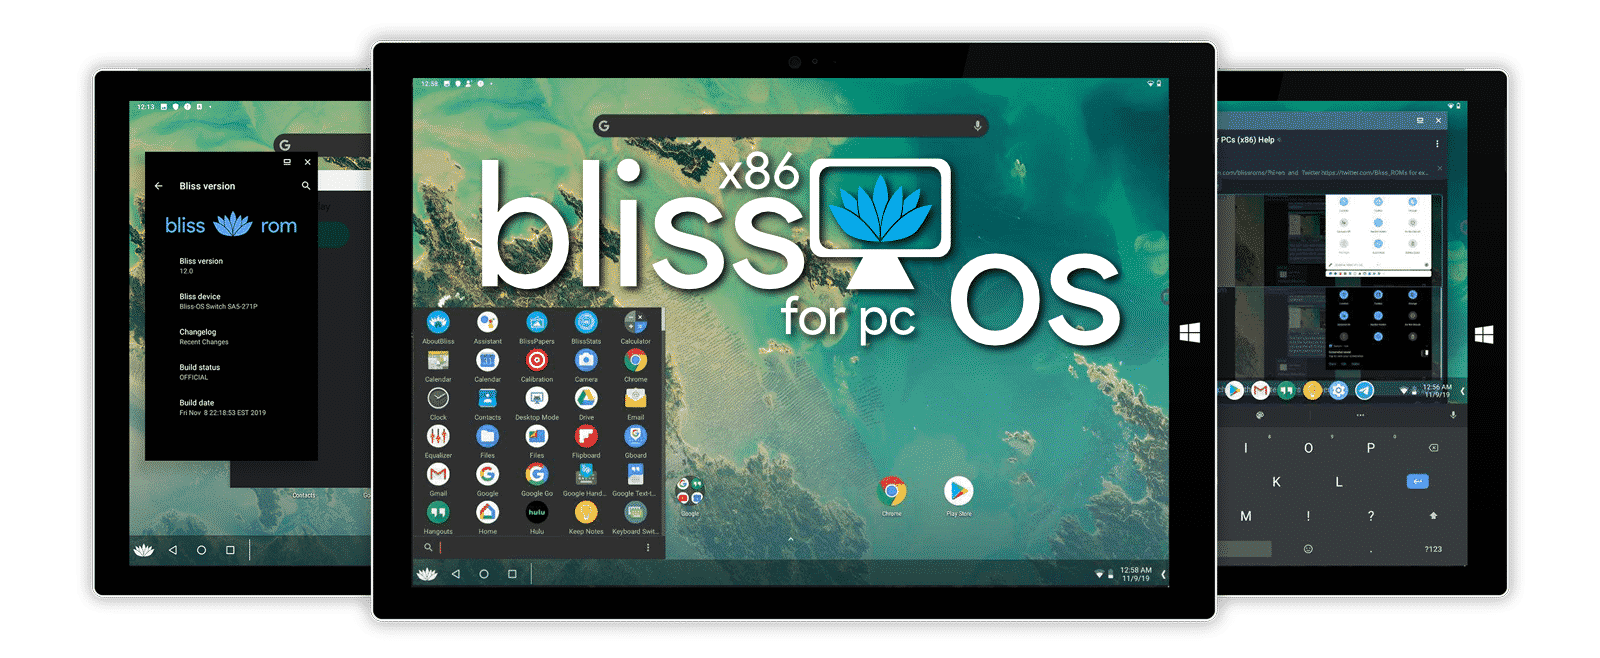 Bliss OS for PC